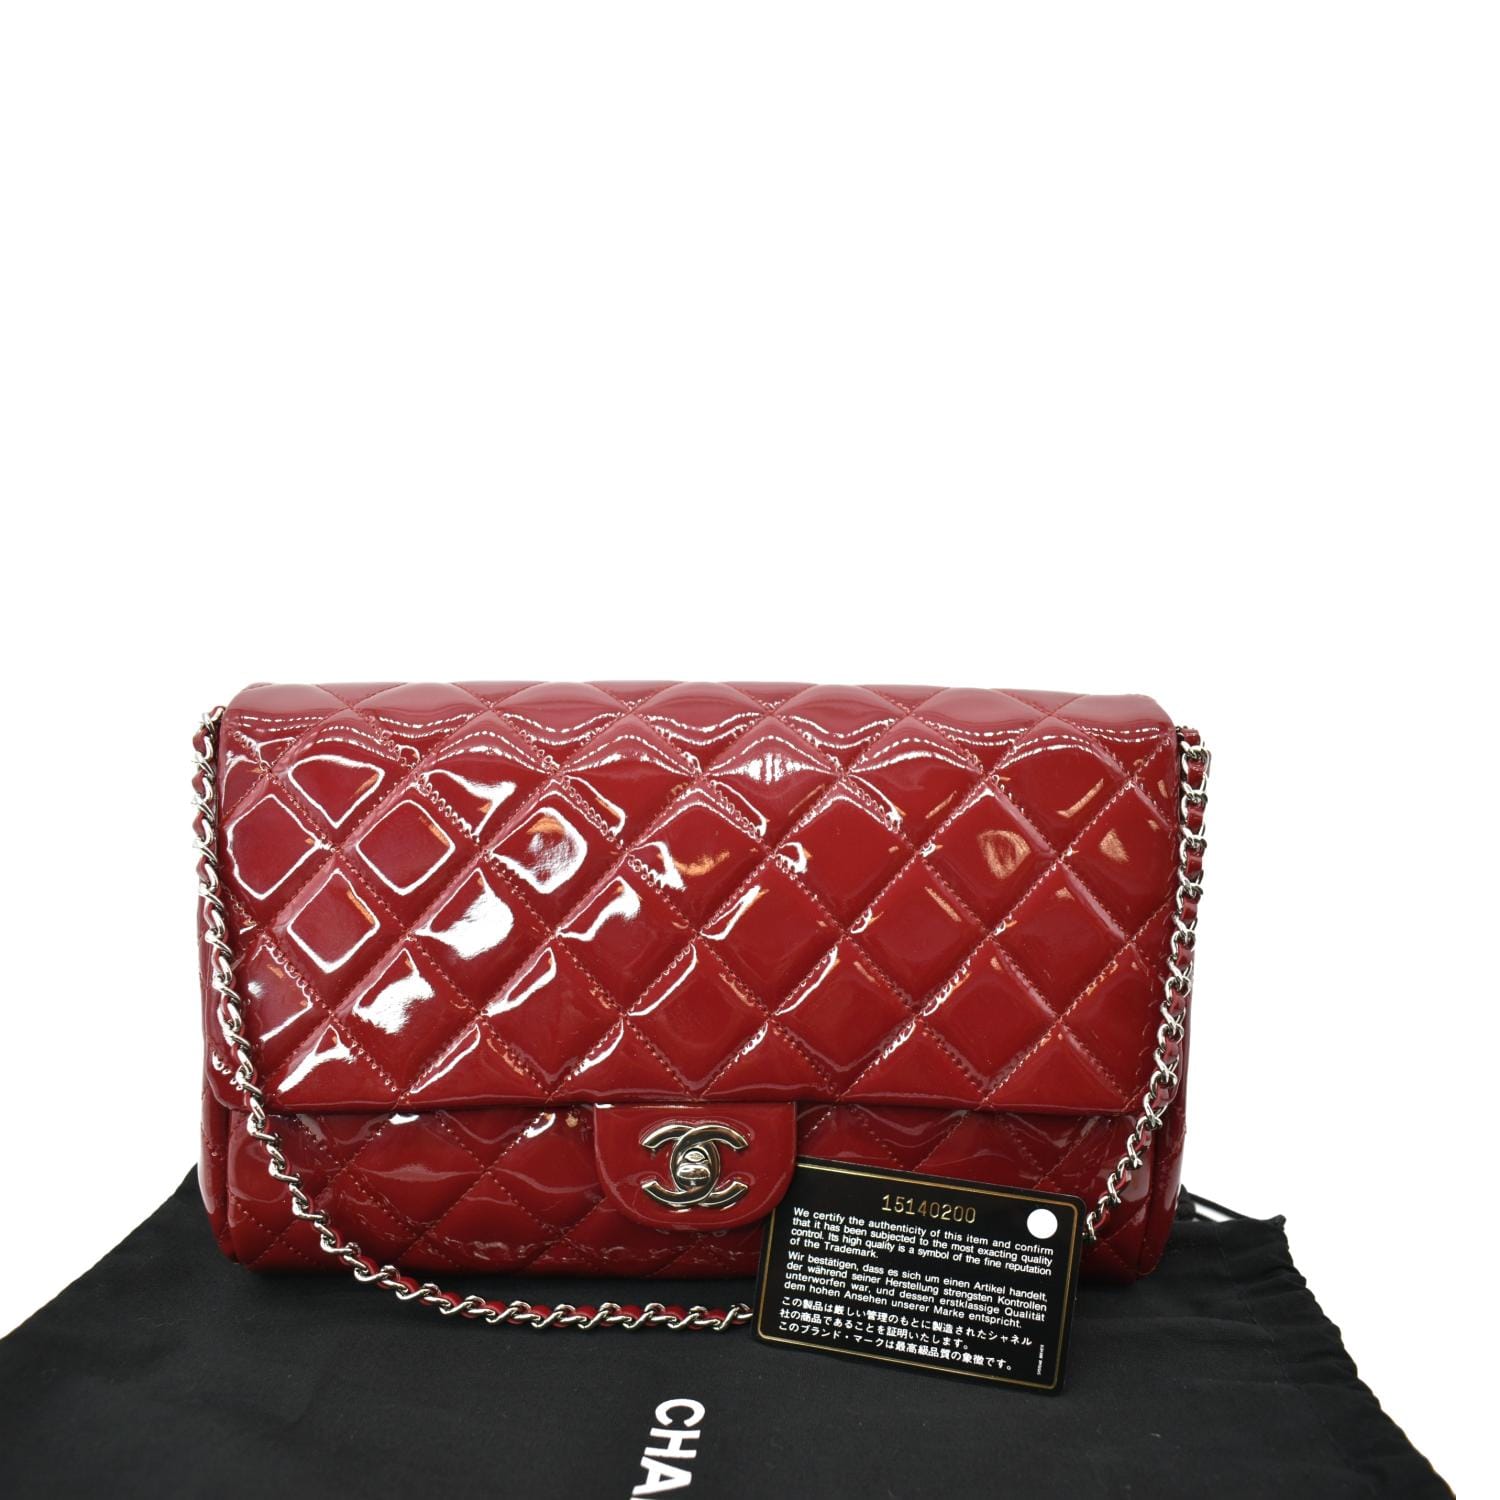 Snag the Latest CHANEL Quilted Clutch Bags & Handbags for Women with Fast  and Free Shipping. Authenticity Guaranteed on Designer Handbags $500+ at  .